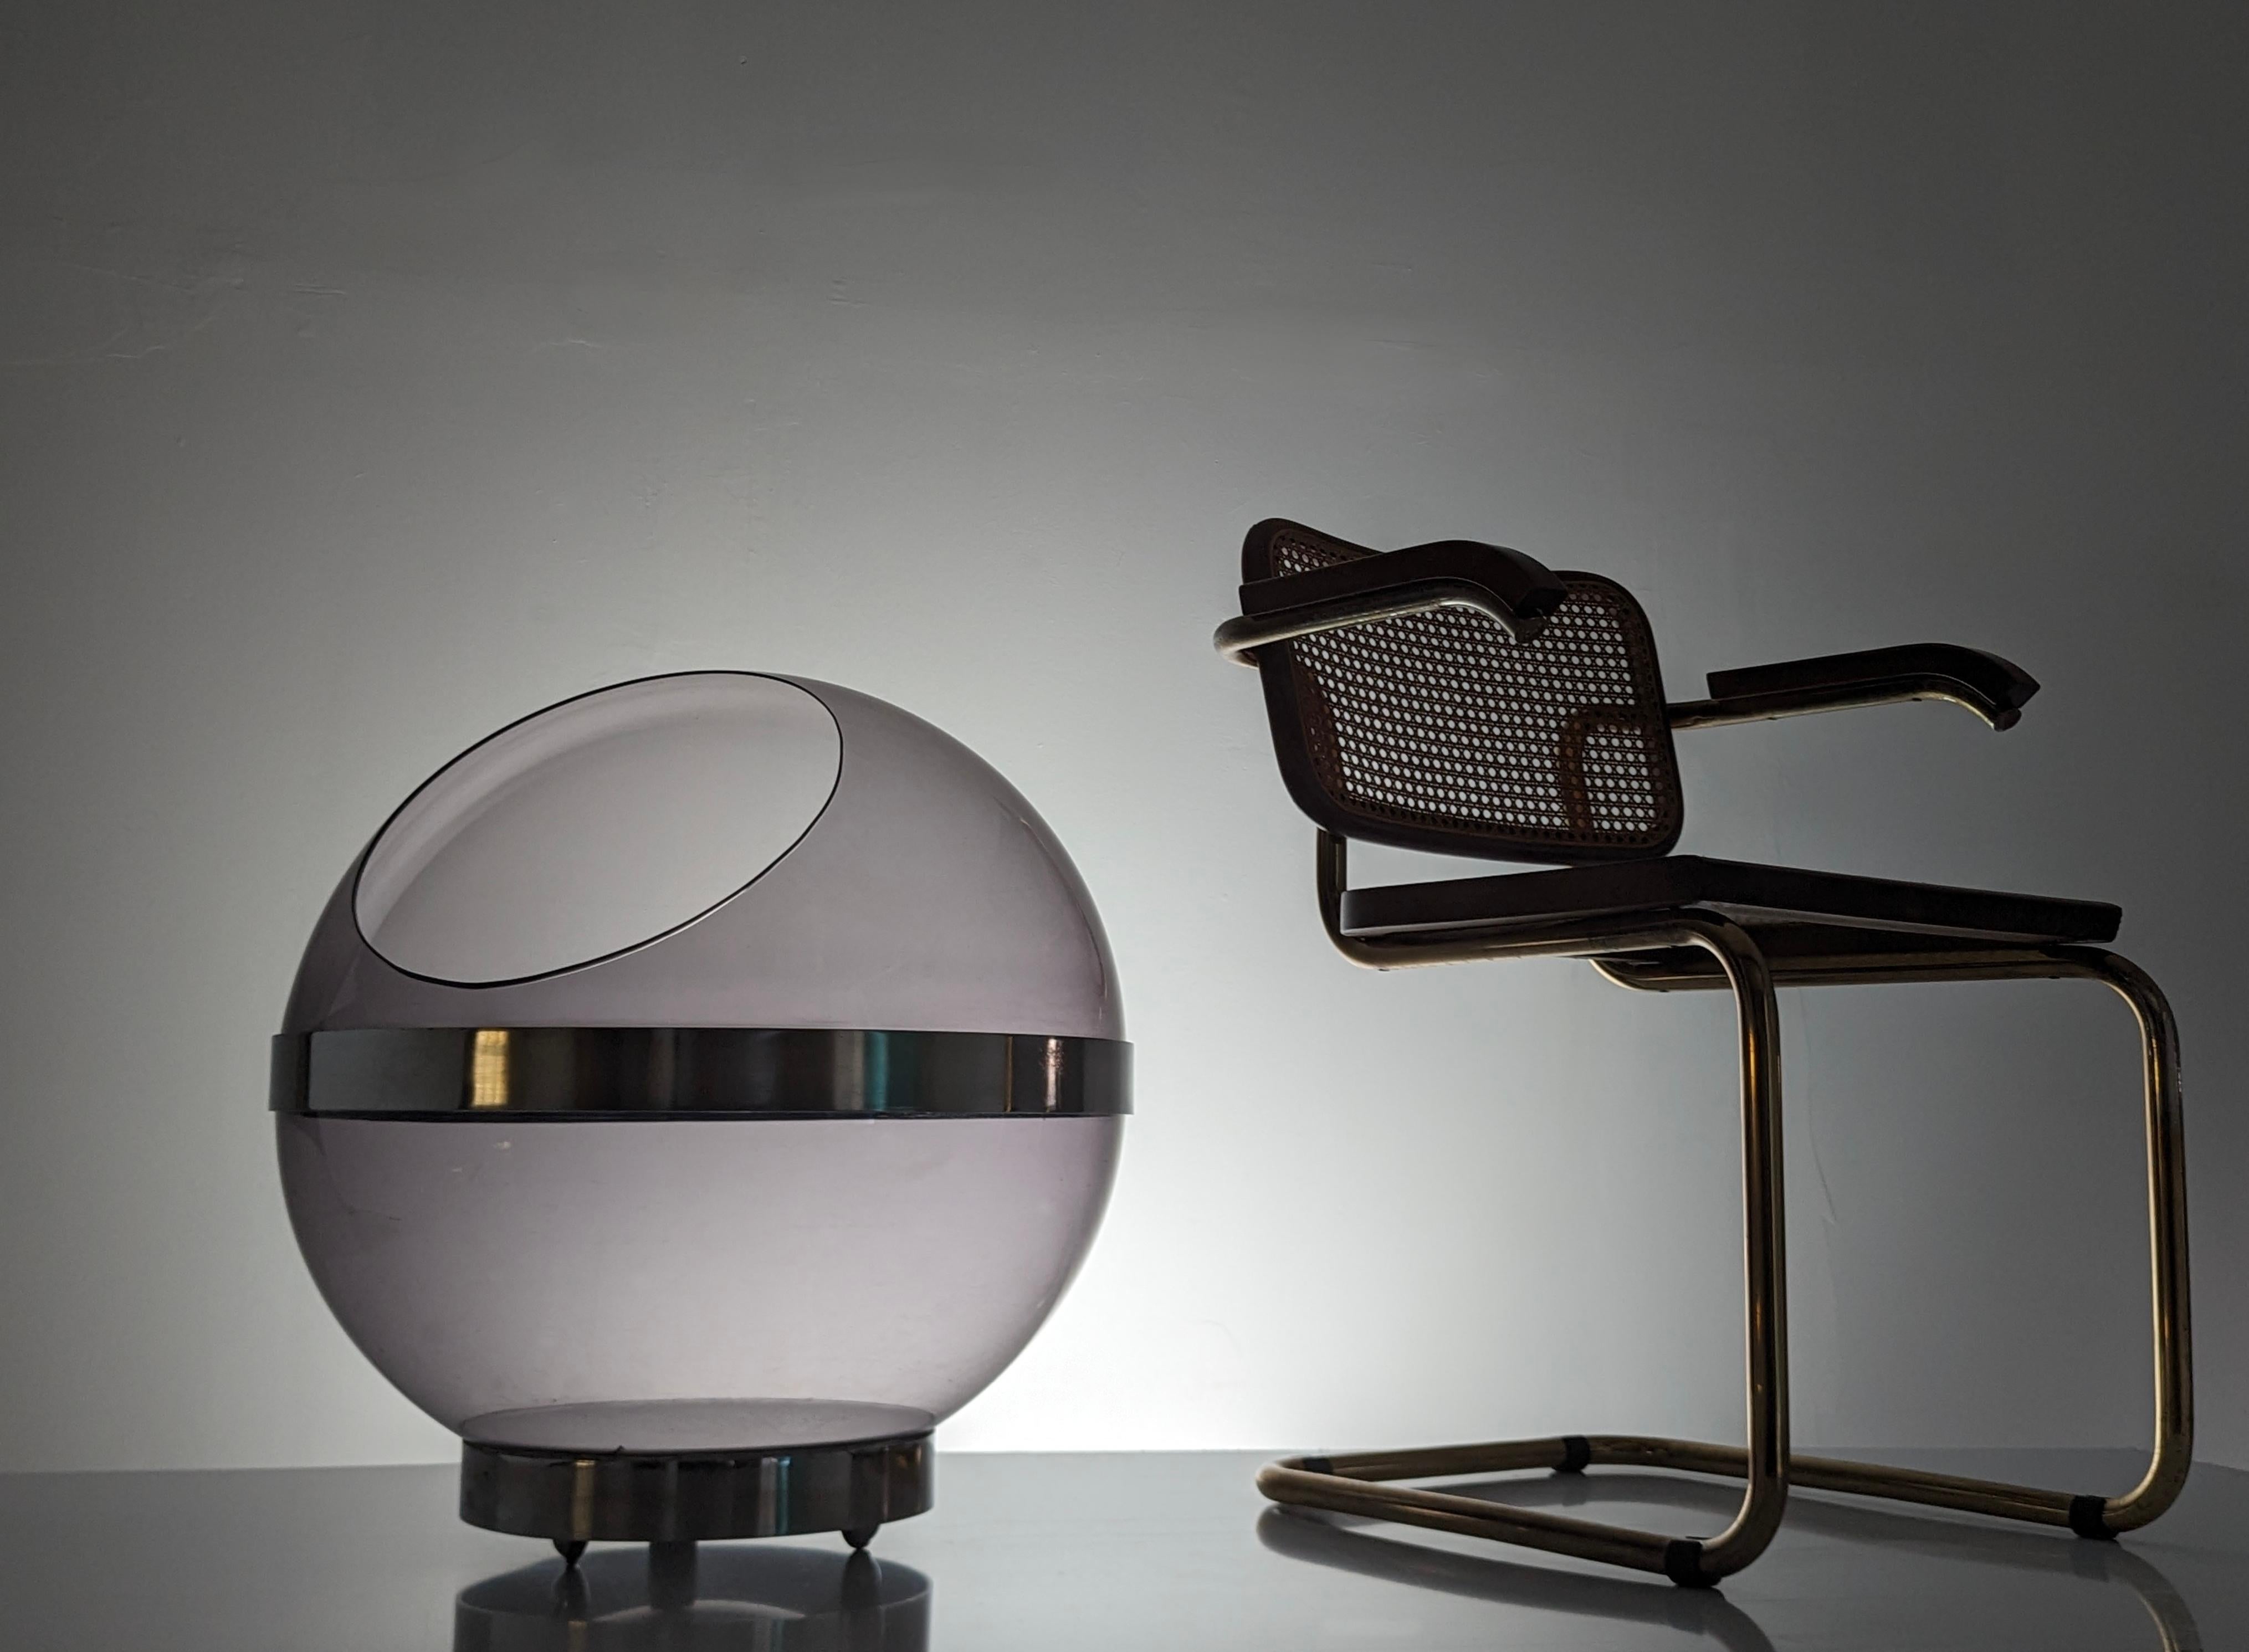 Sphere bar furniture designed by Boris Tabacoff Edition 'Mobilier Modulaire Moderne', 1971. Made of smoked acrylic glass shell, chromed steel, and base with swivel wheels.